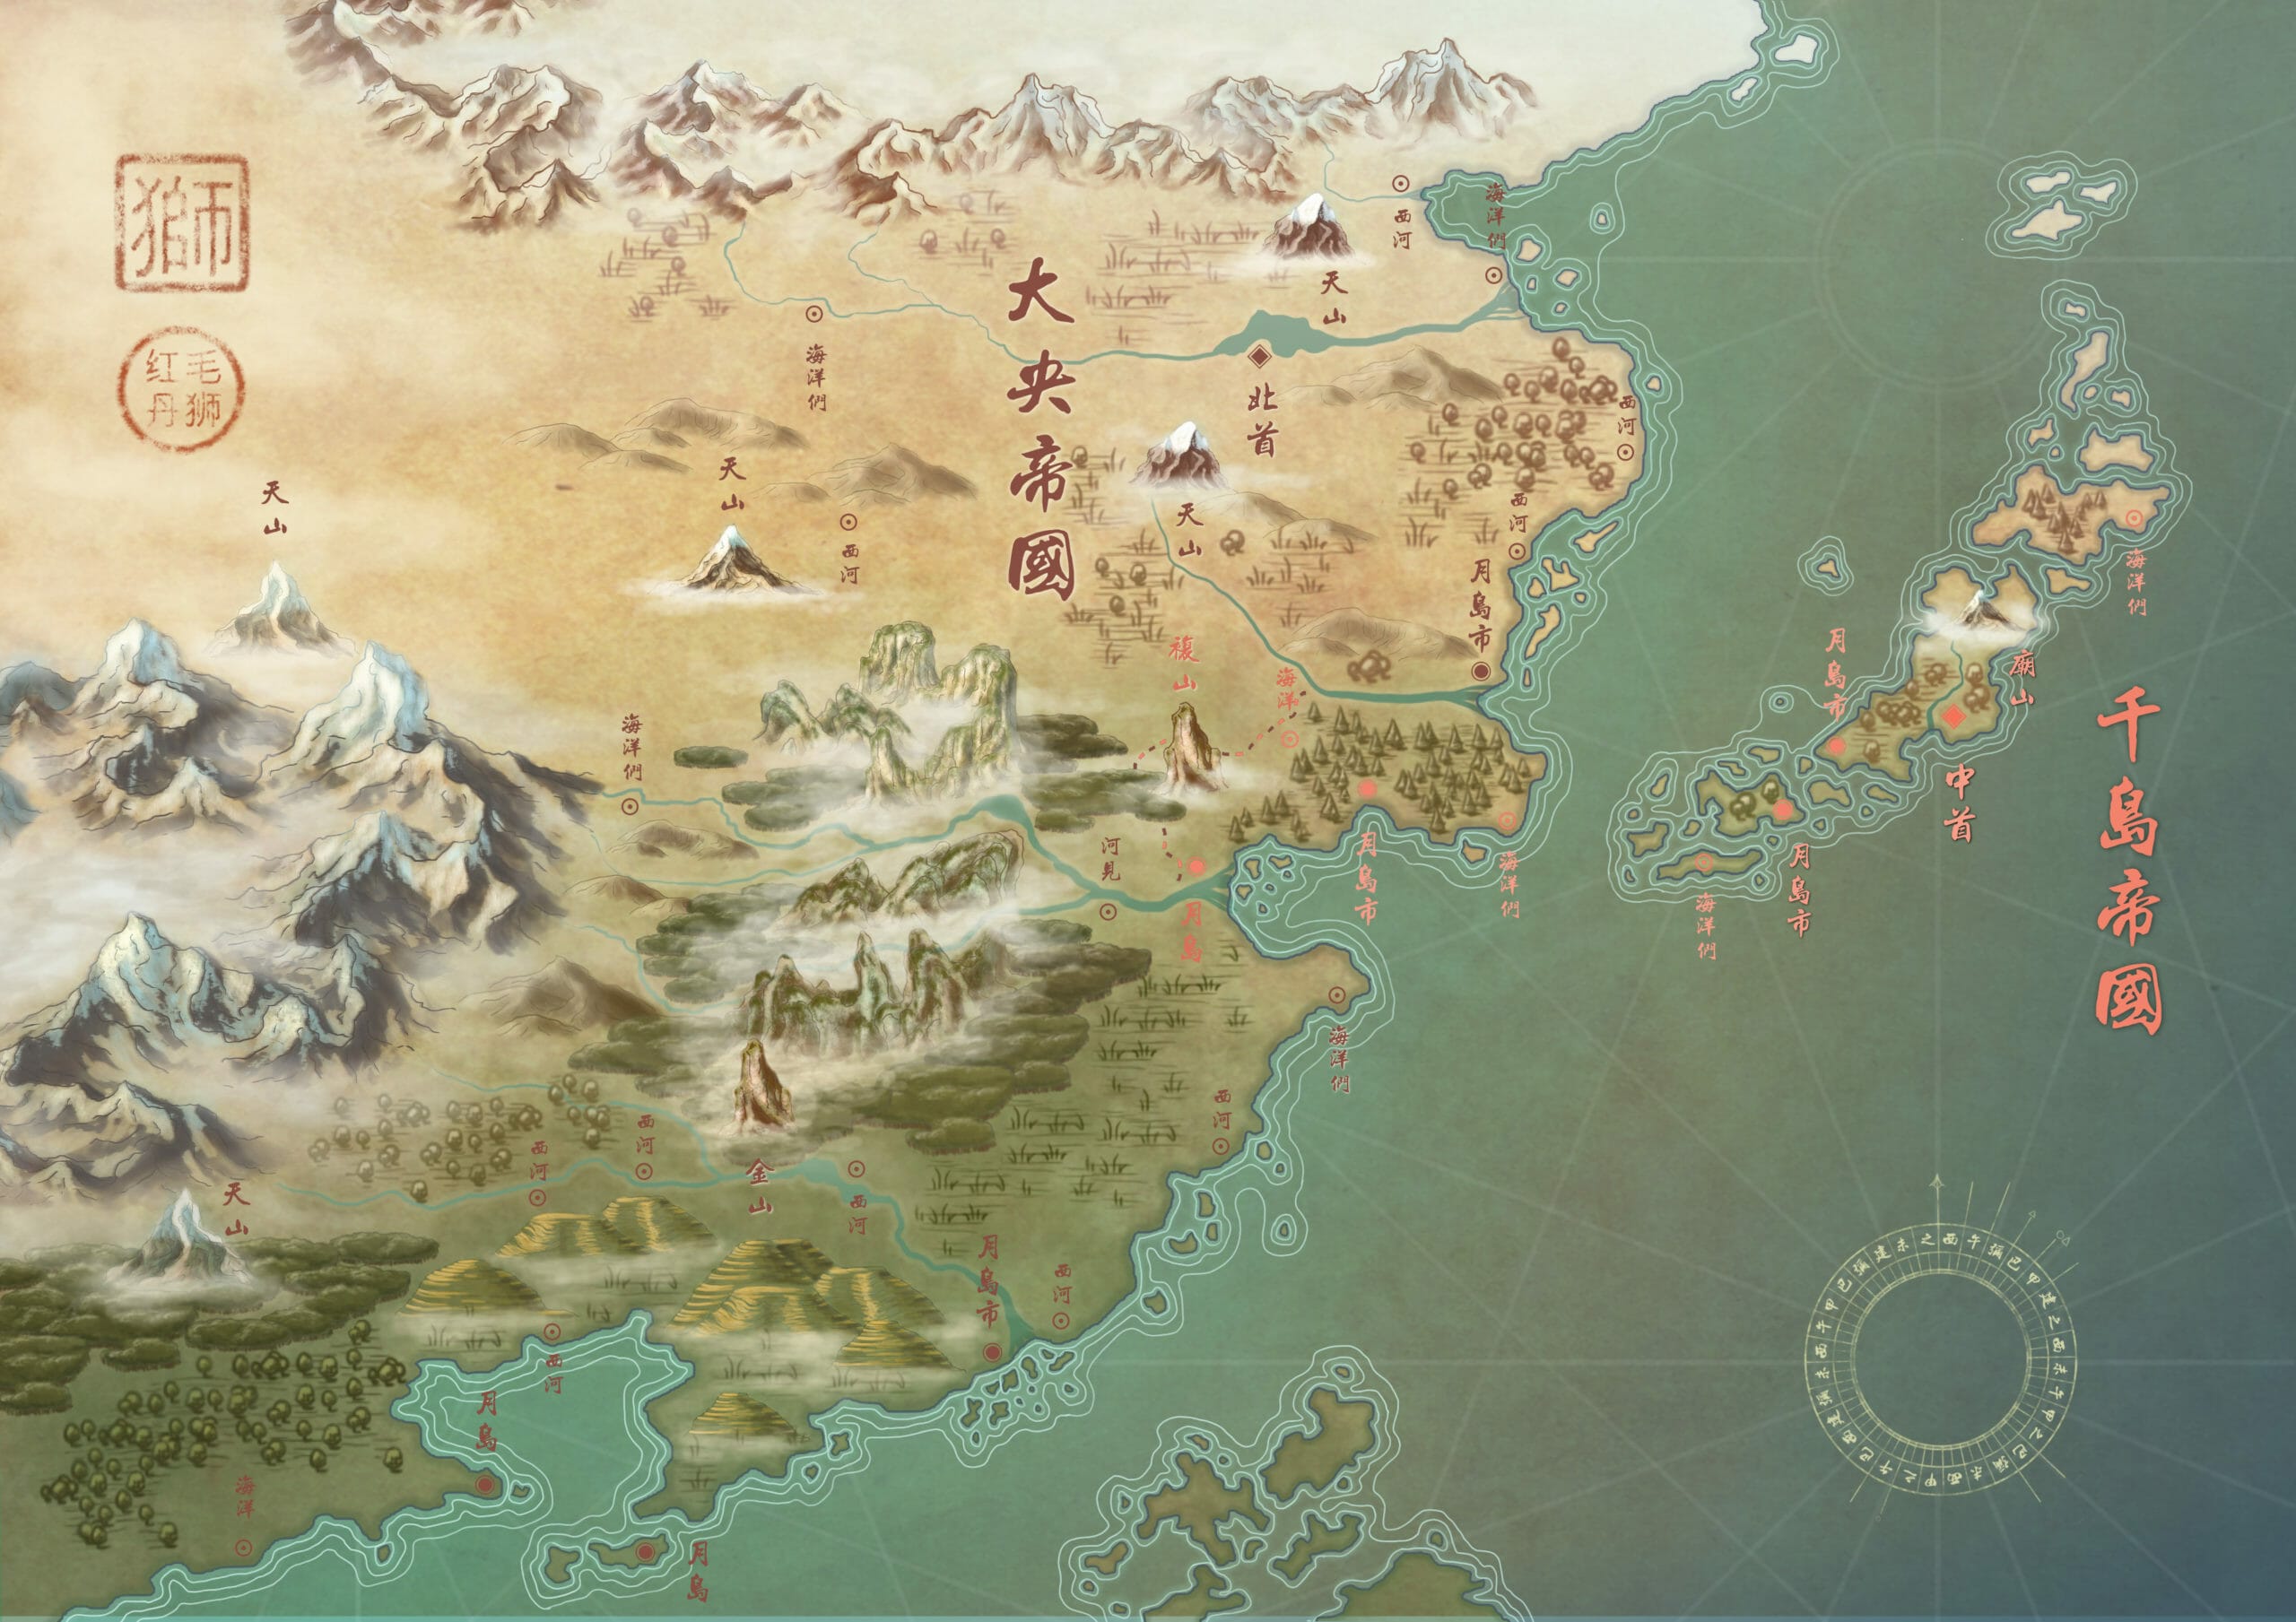 D&D campaign map inspired by Chinese mythology